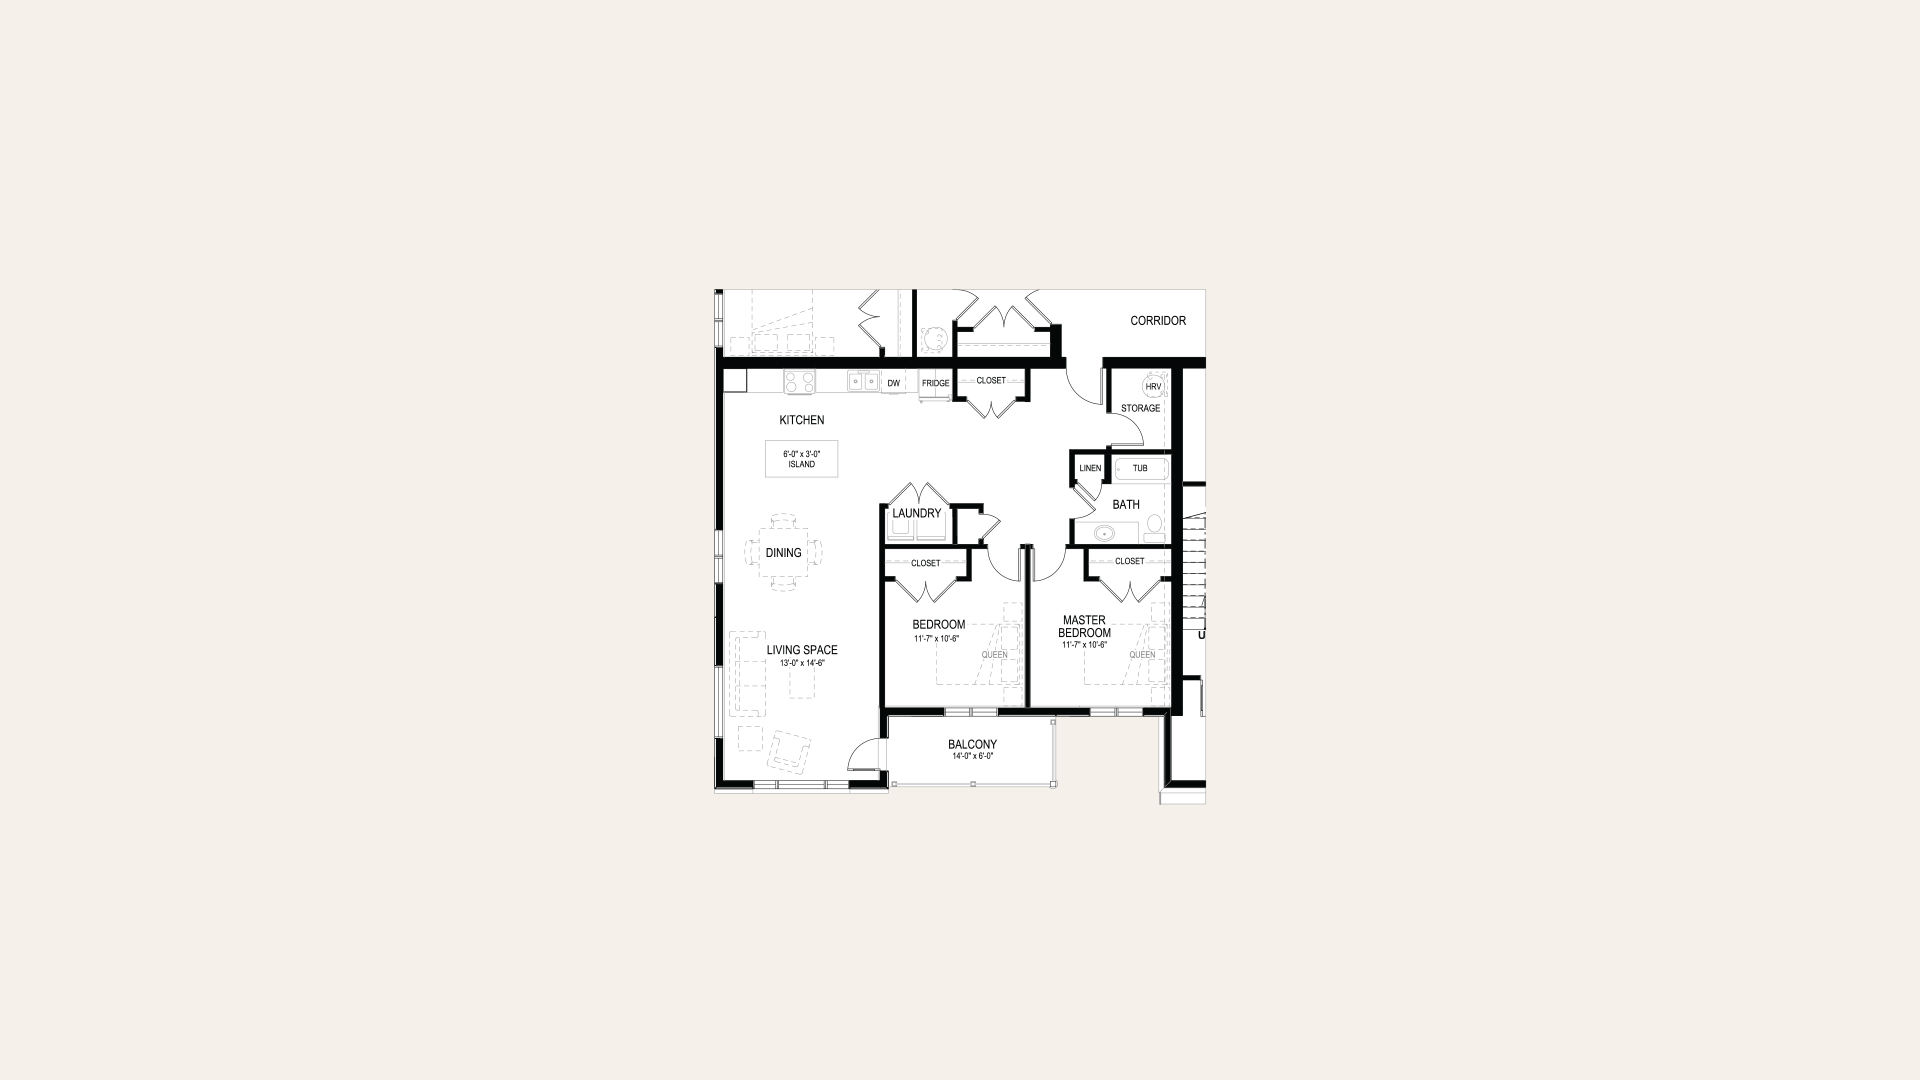 Floor plan of apartment B in Building A. Two bedrooms, one bathroom, laundry closet, storage room, balcony, and an open concept kitchen and living room.